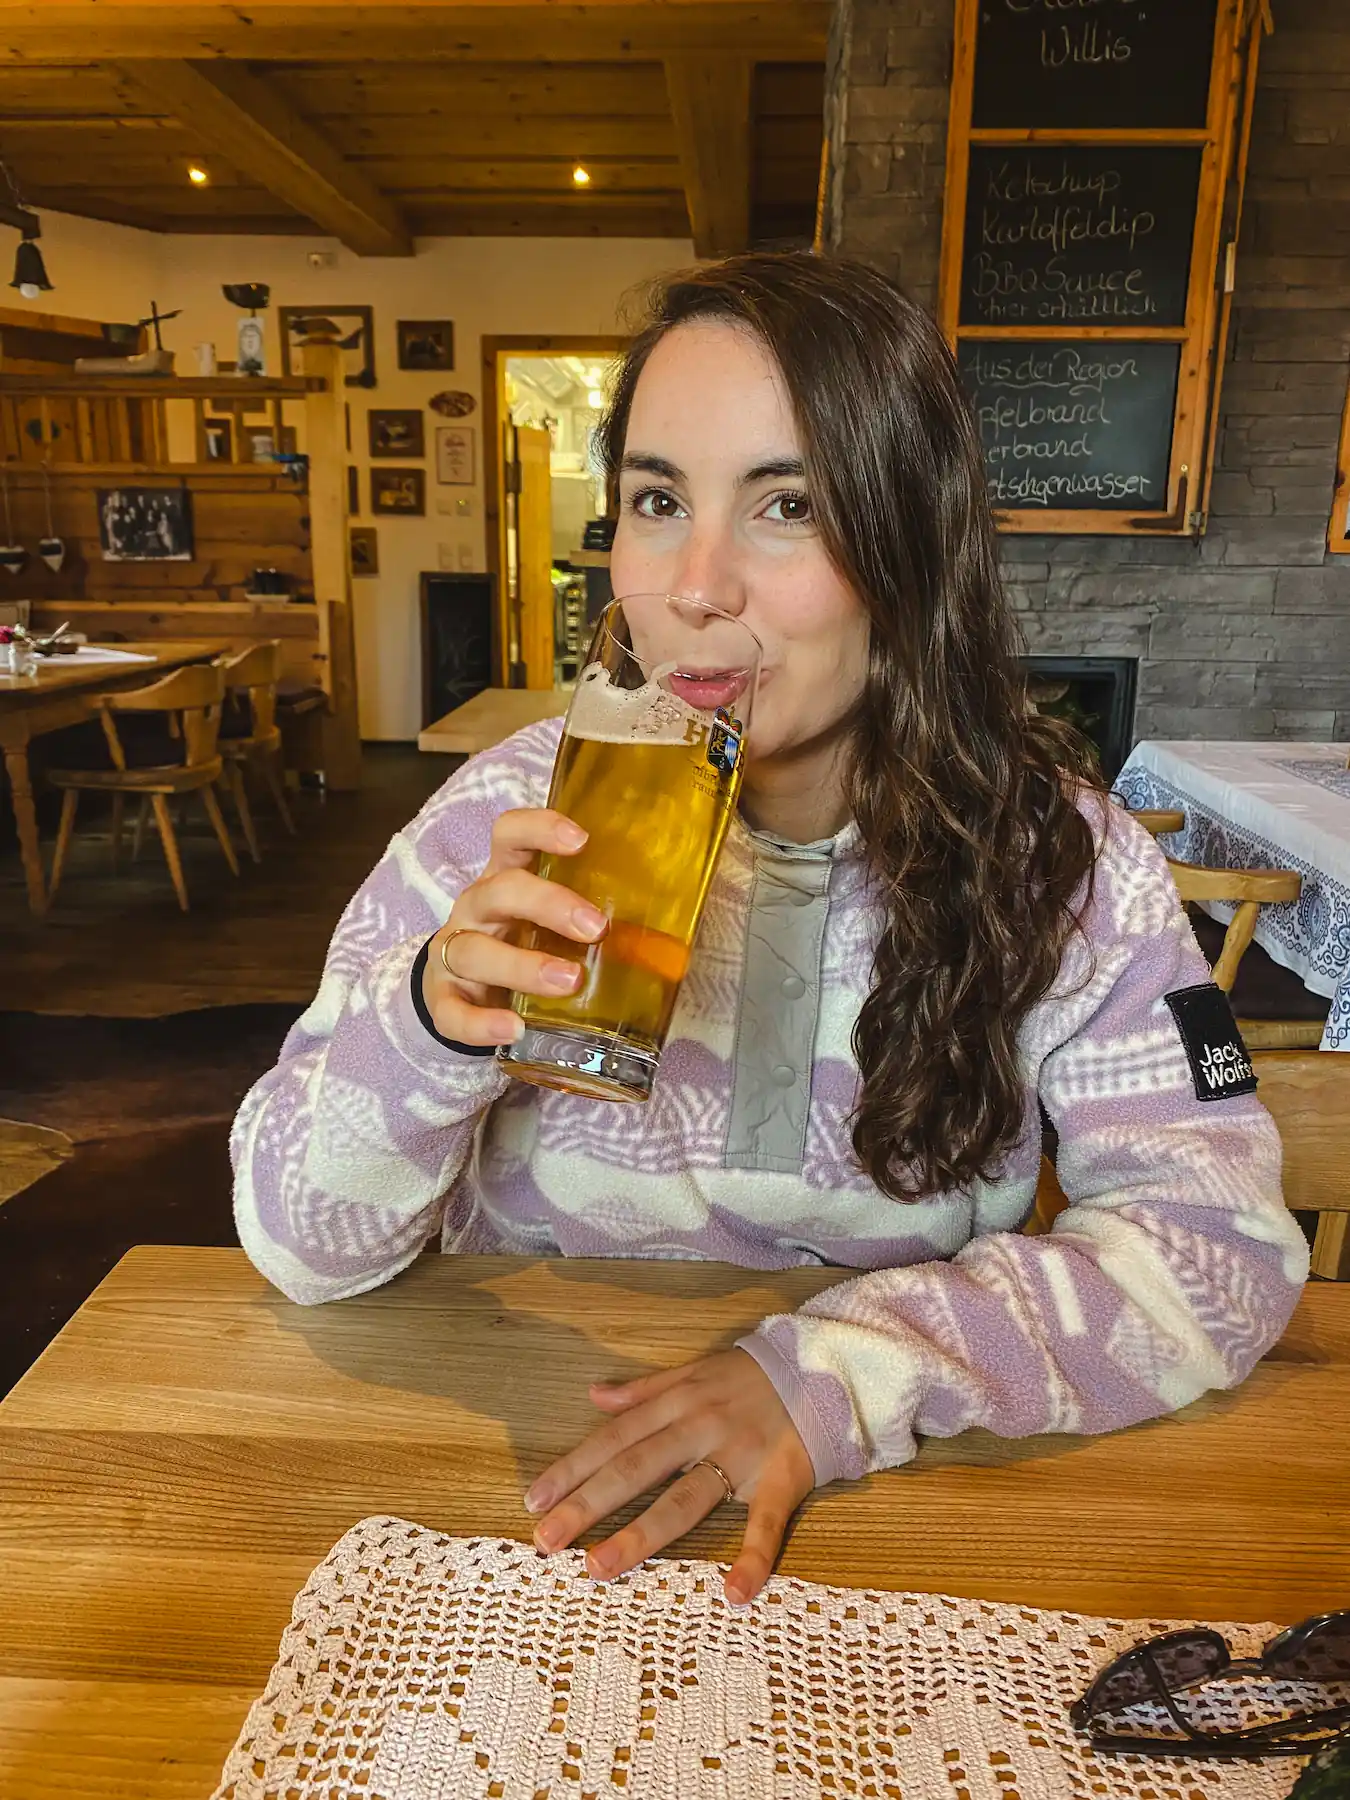 Woman drinking beer